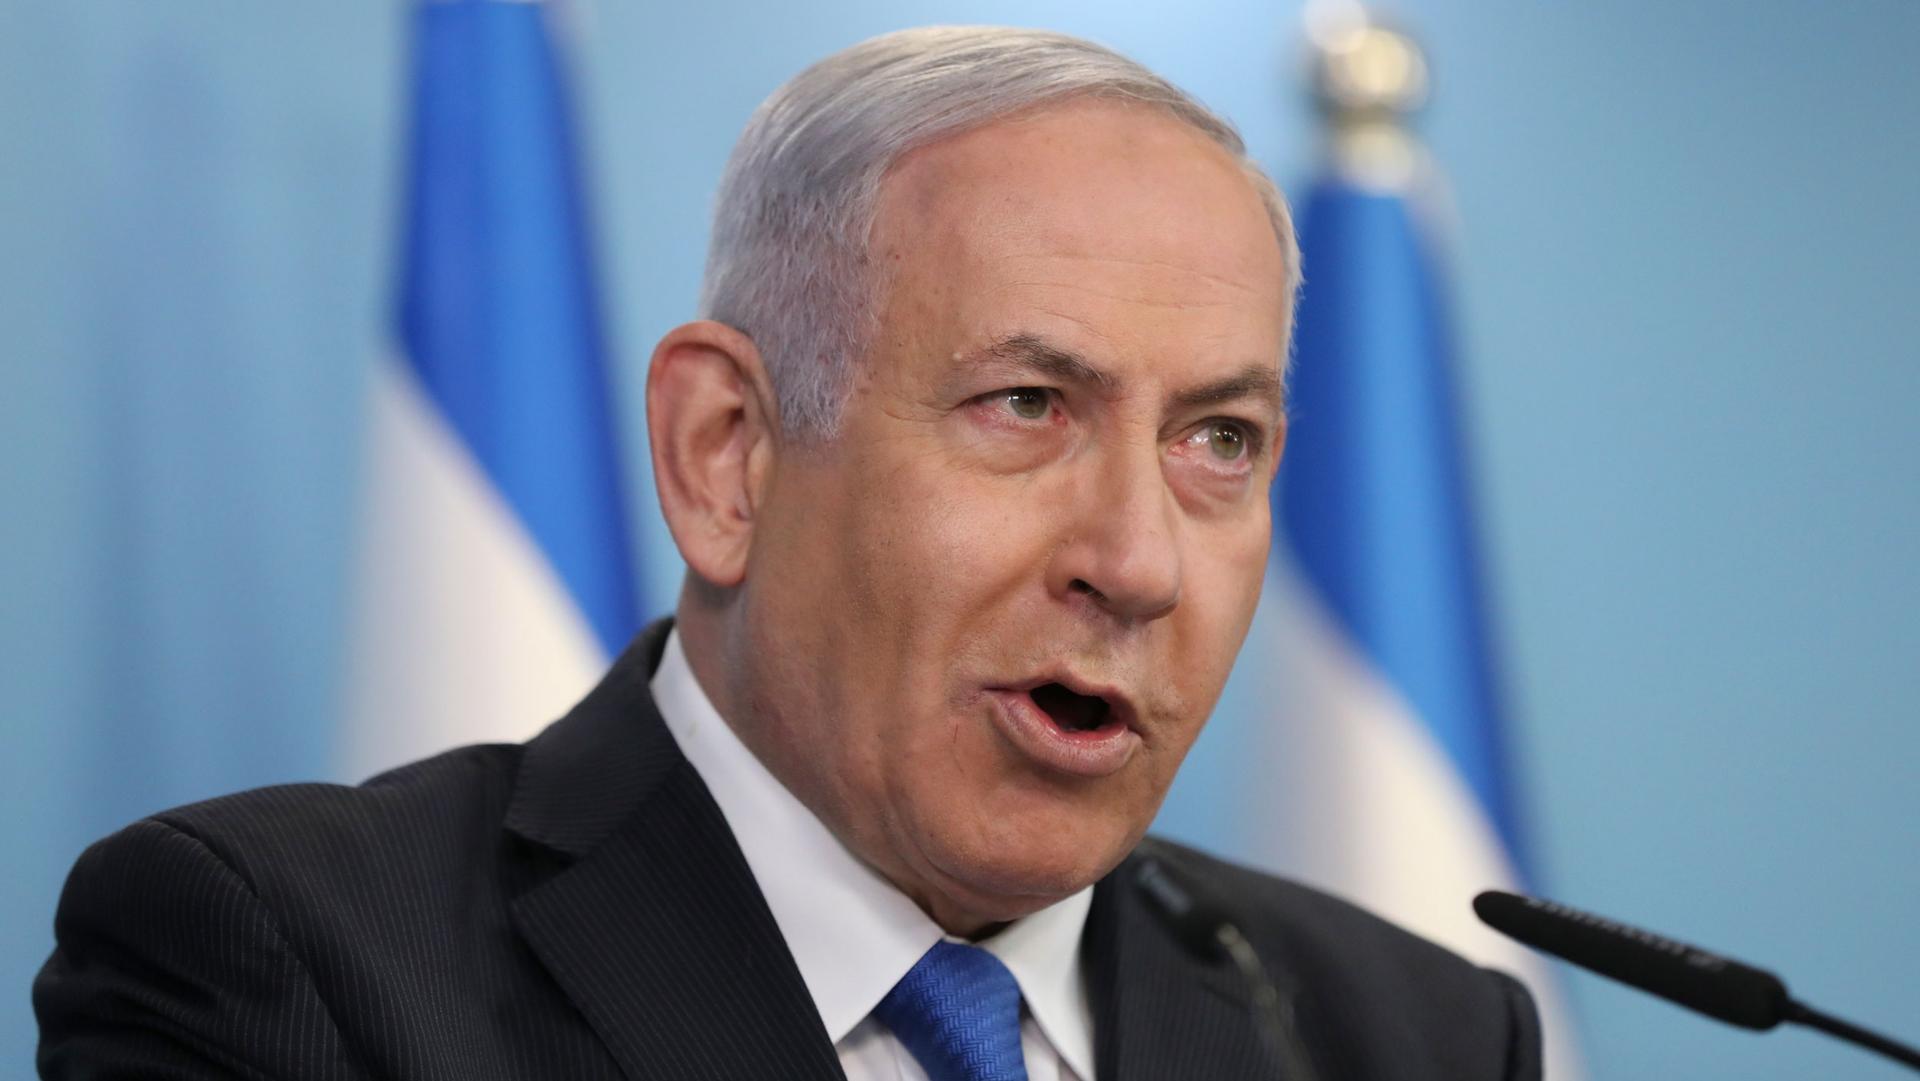 Israeli Prime Minister Benjamin Netanyahu is shown wearing a dark suit and blue tied while speaking into a microphone.